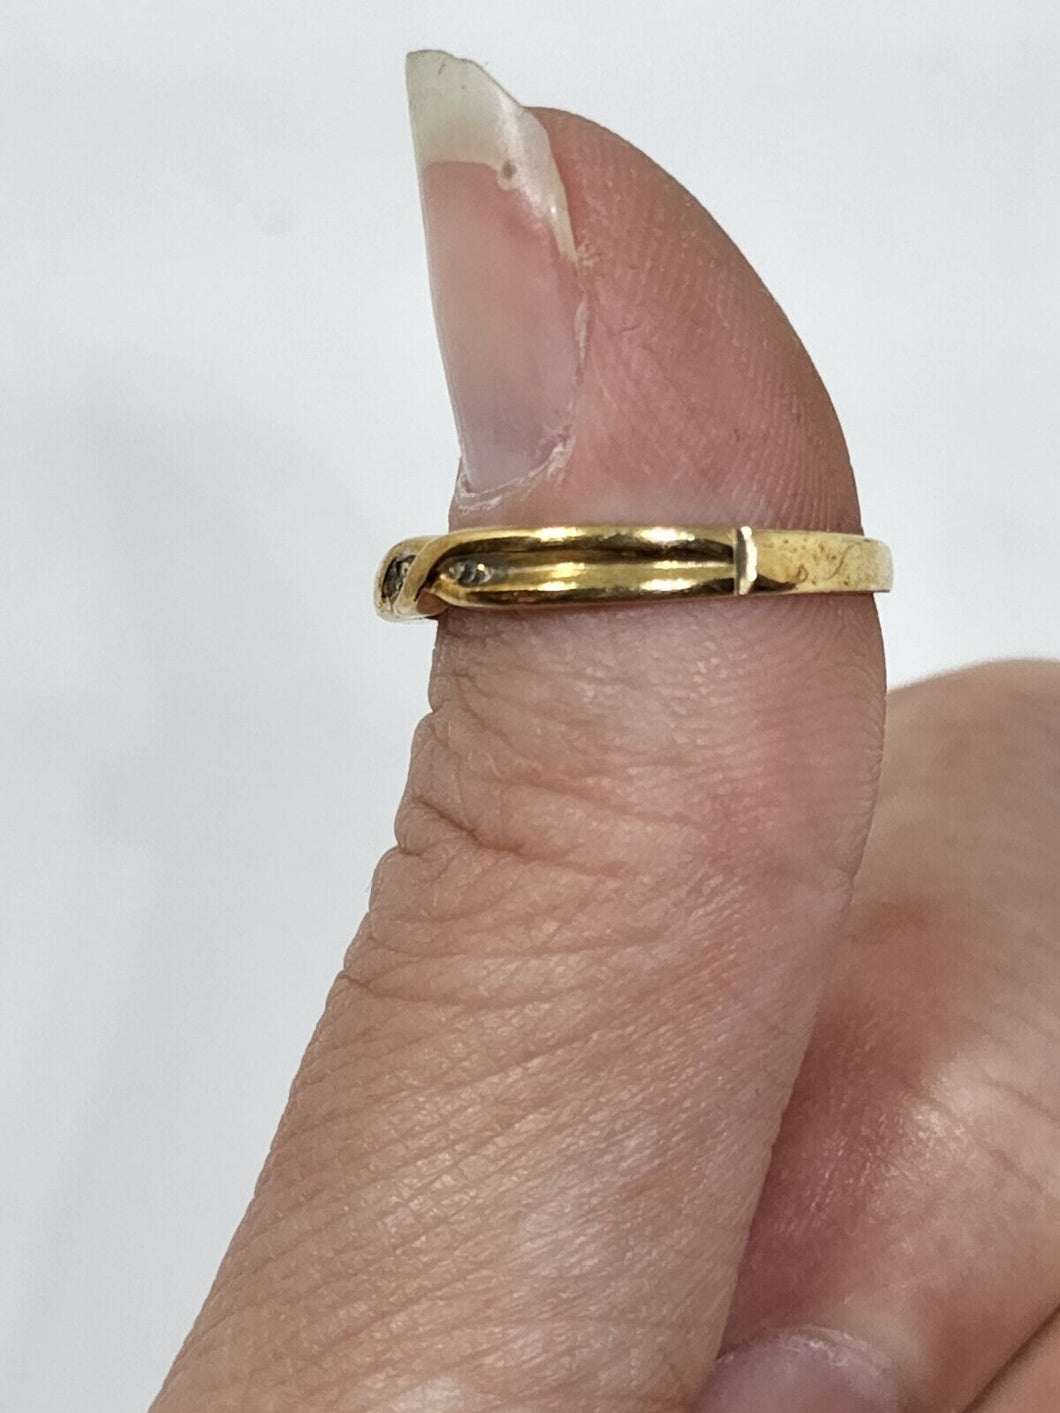 Gold & Platinum Ring Scratches: What Do I Do?